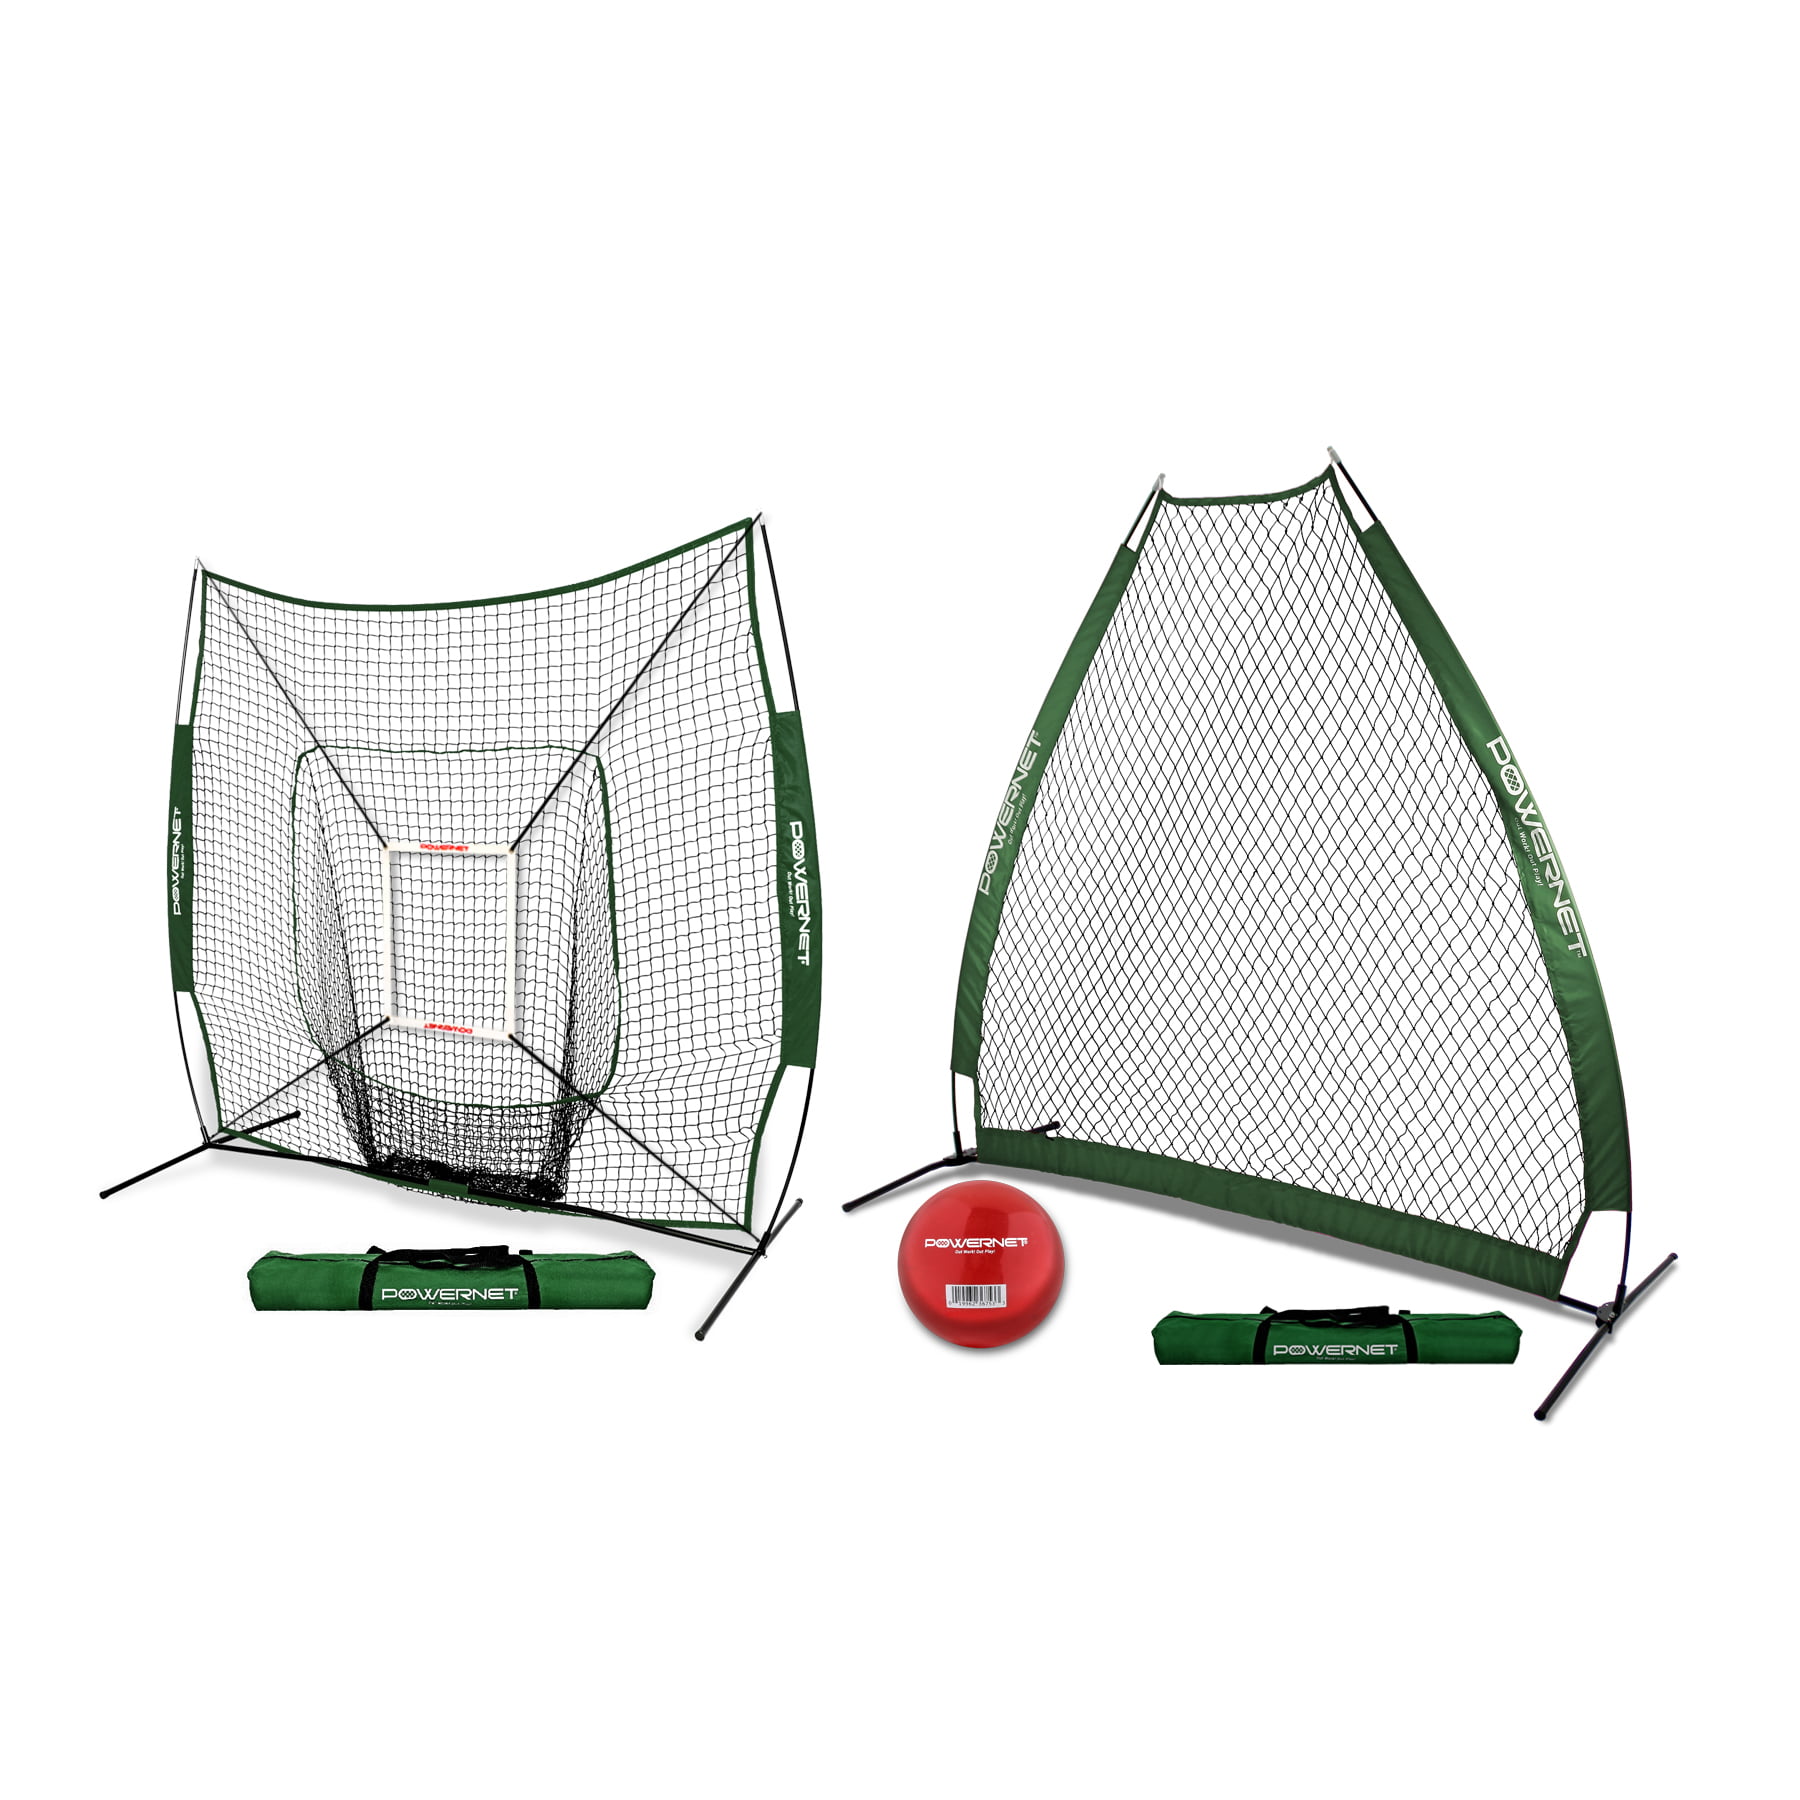 PowerNet 7x7 Portable A-Frame Pitching Screen for Batting Practice w/ Carry Bag 